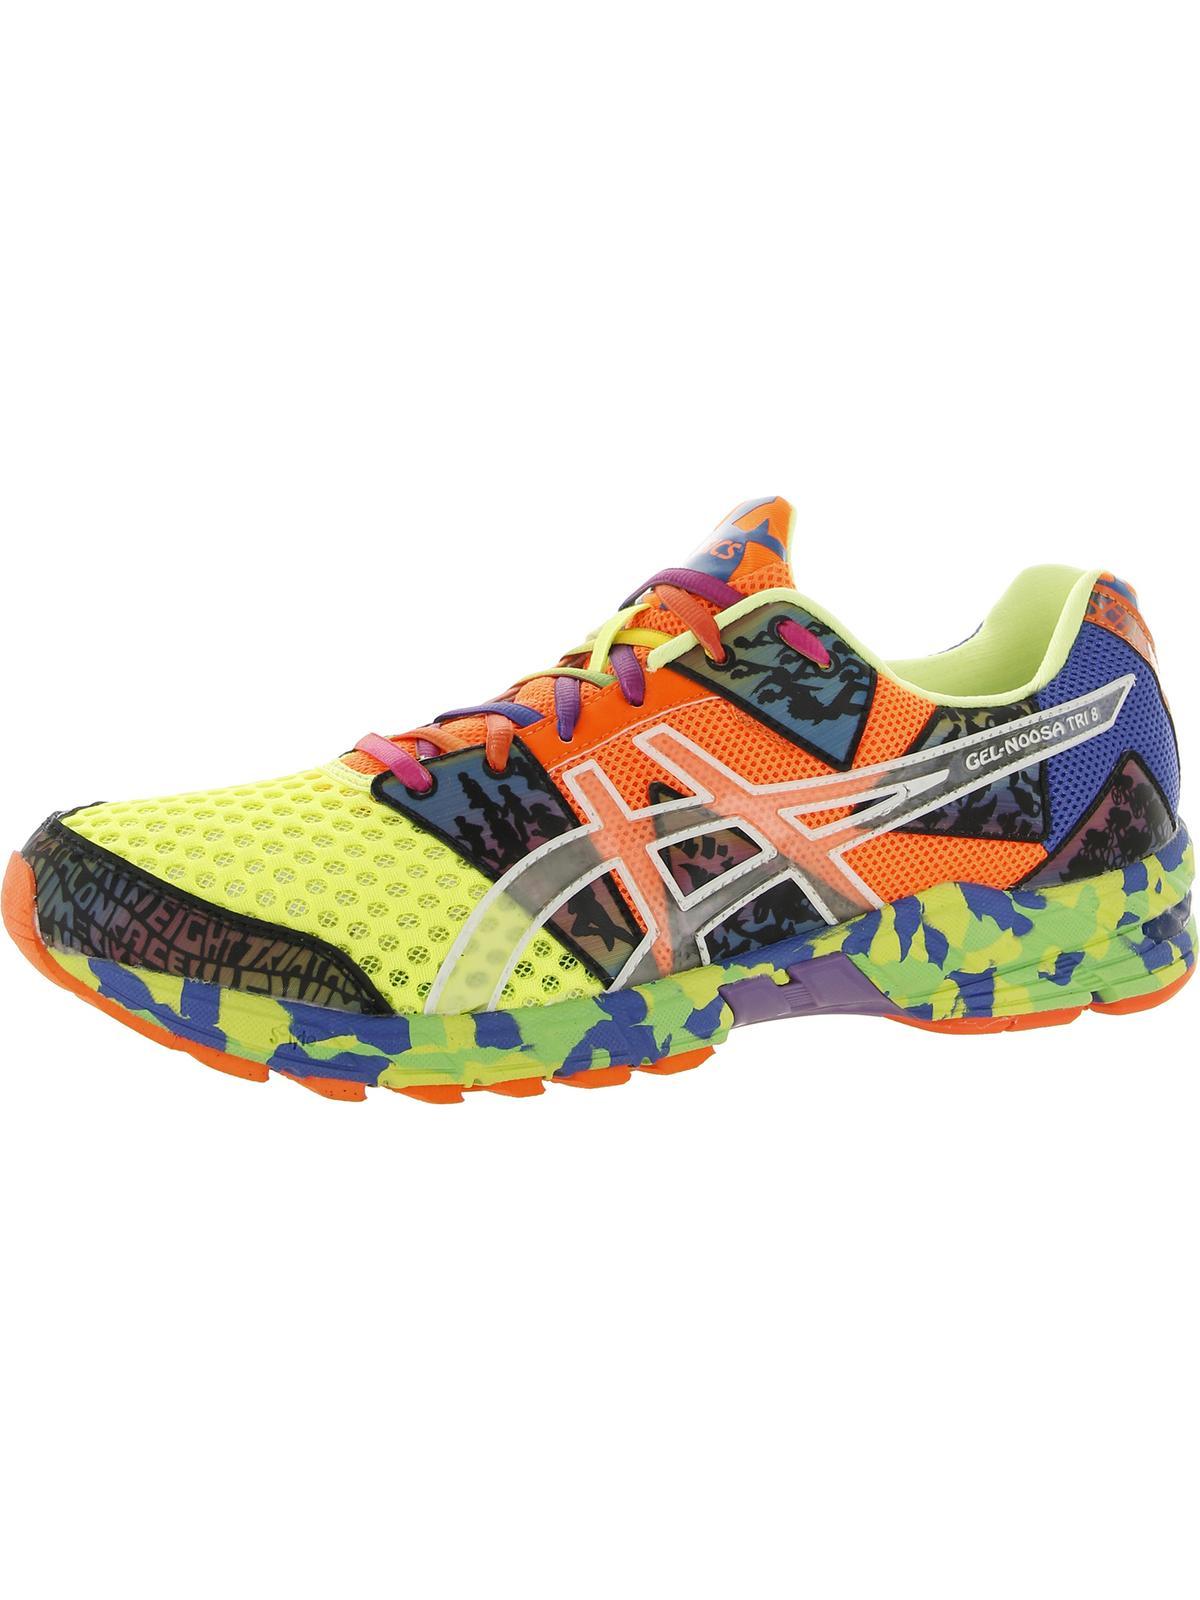 Asics Gel Noosa Tri 8 Fitness Running Athletic And Training Shoes | Lyst